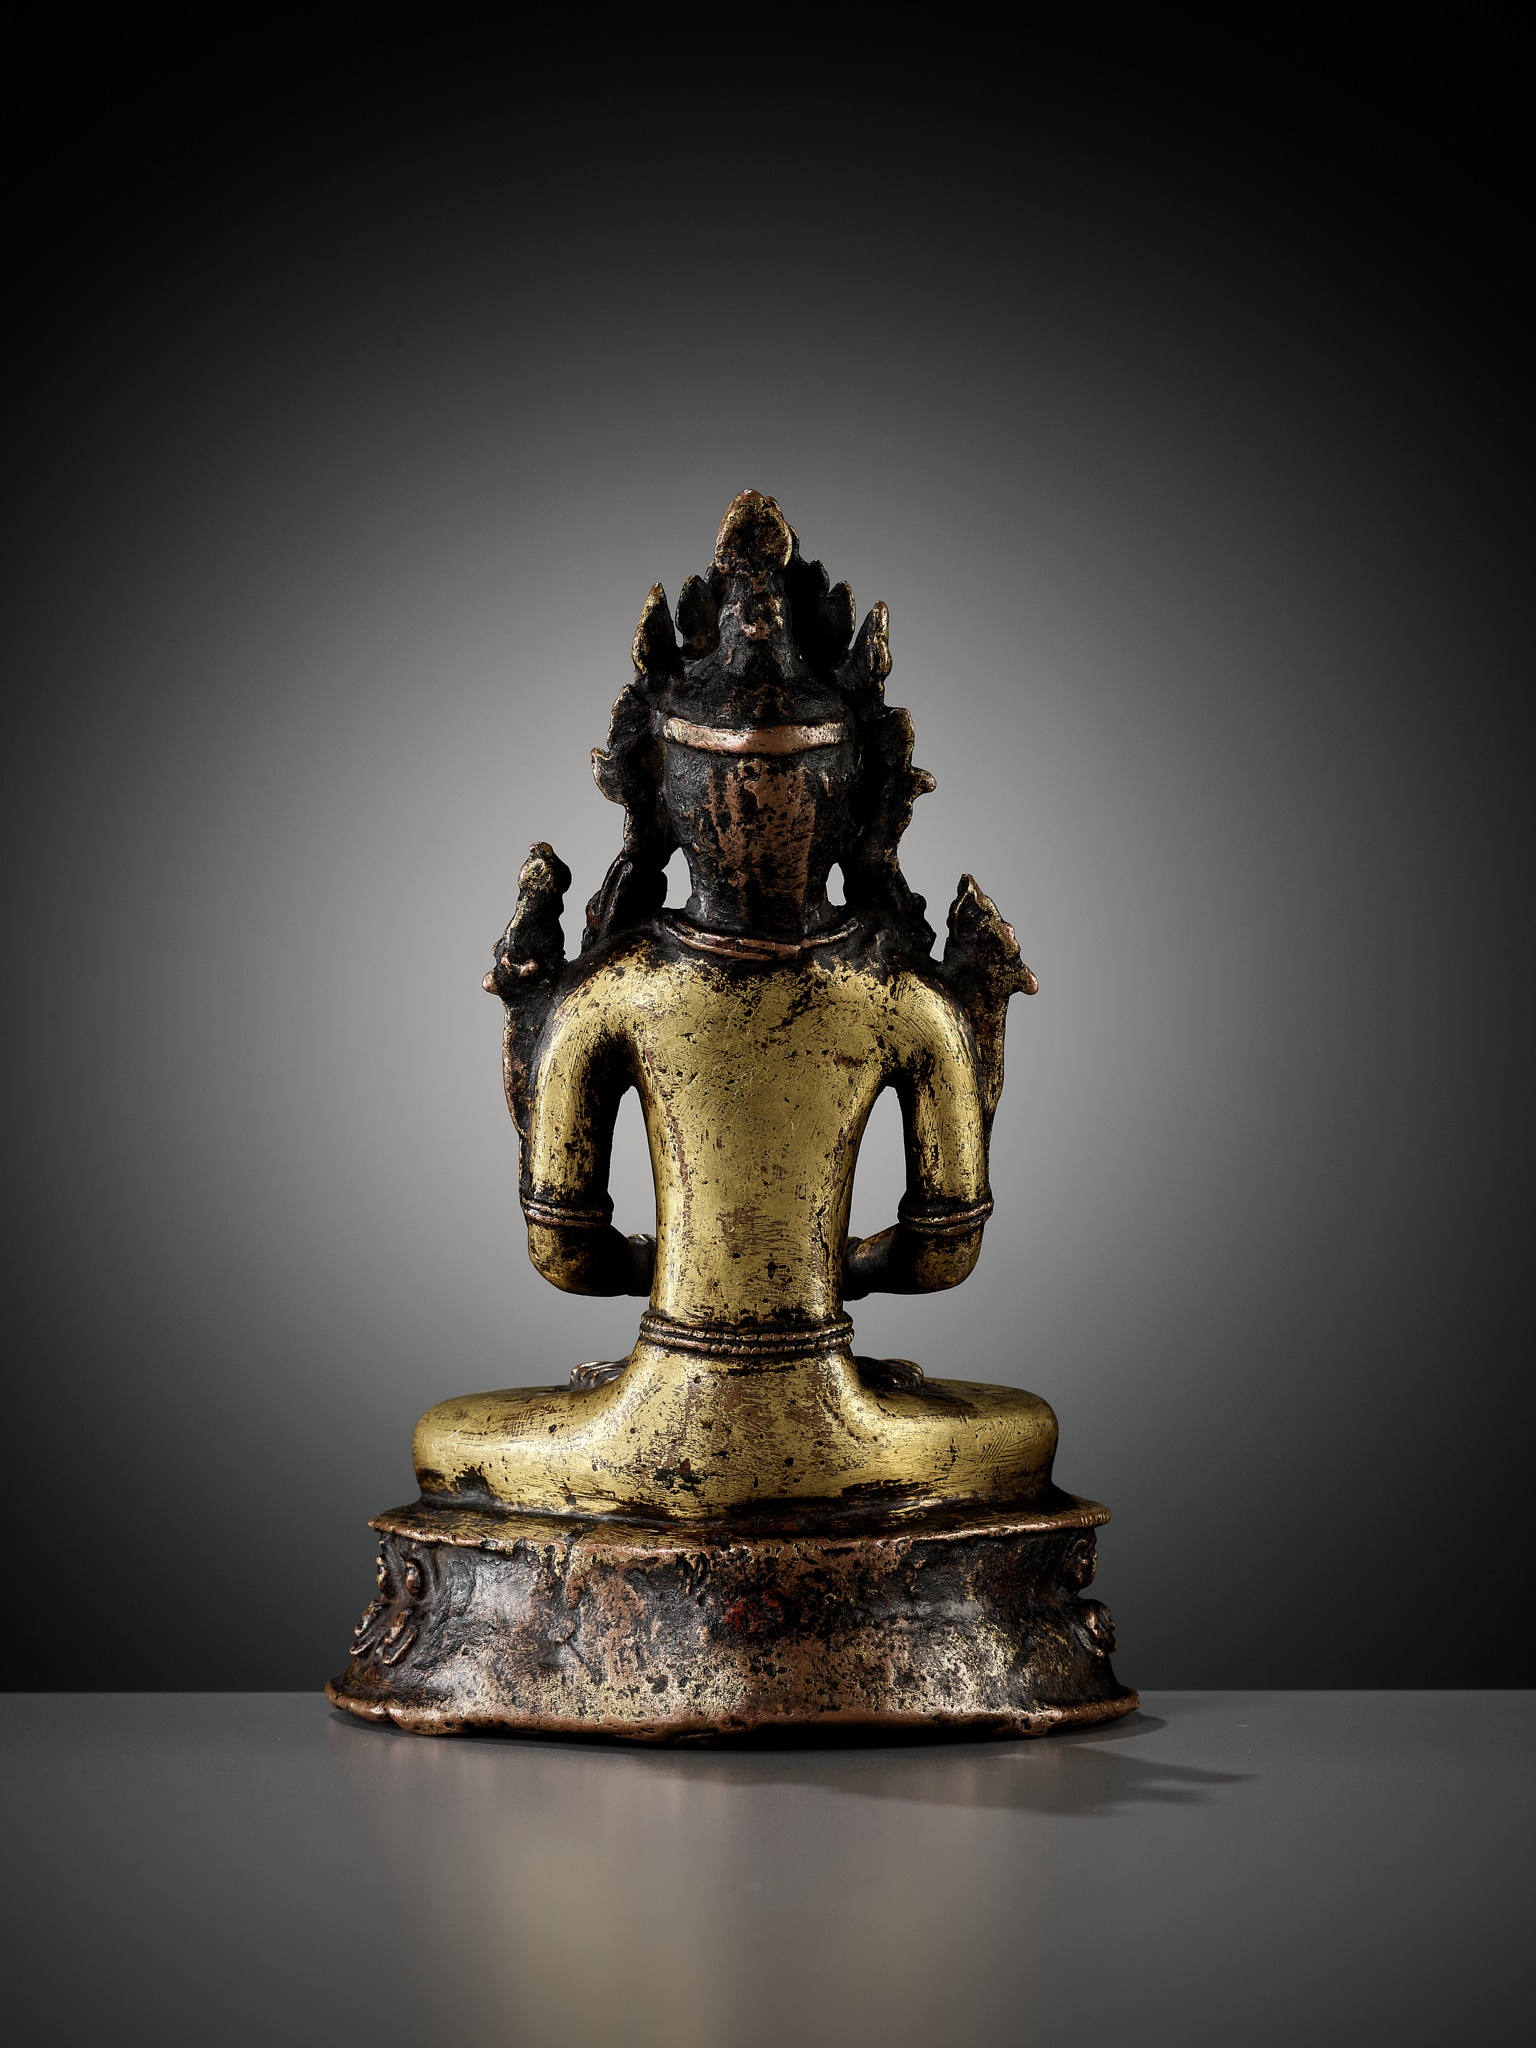 A GILT COPPER-ALLOY FIGURE OF KUNZANG AKOR, BON TRADITION, TIBET, 14TH-15TH CENTURY - Image 8 of 13